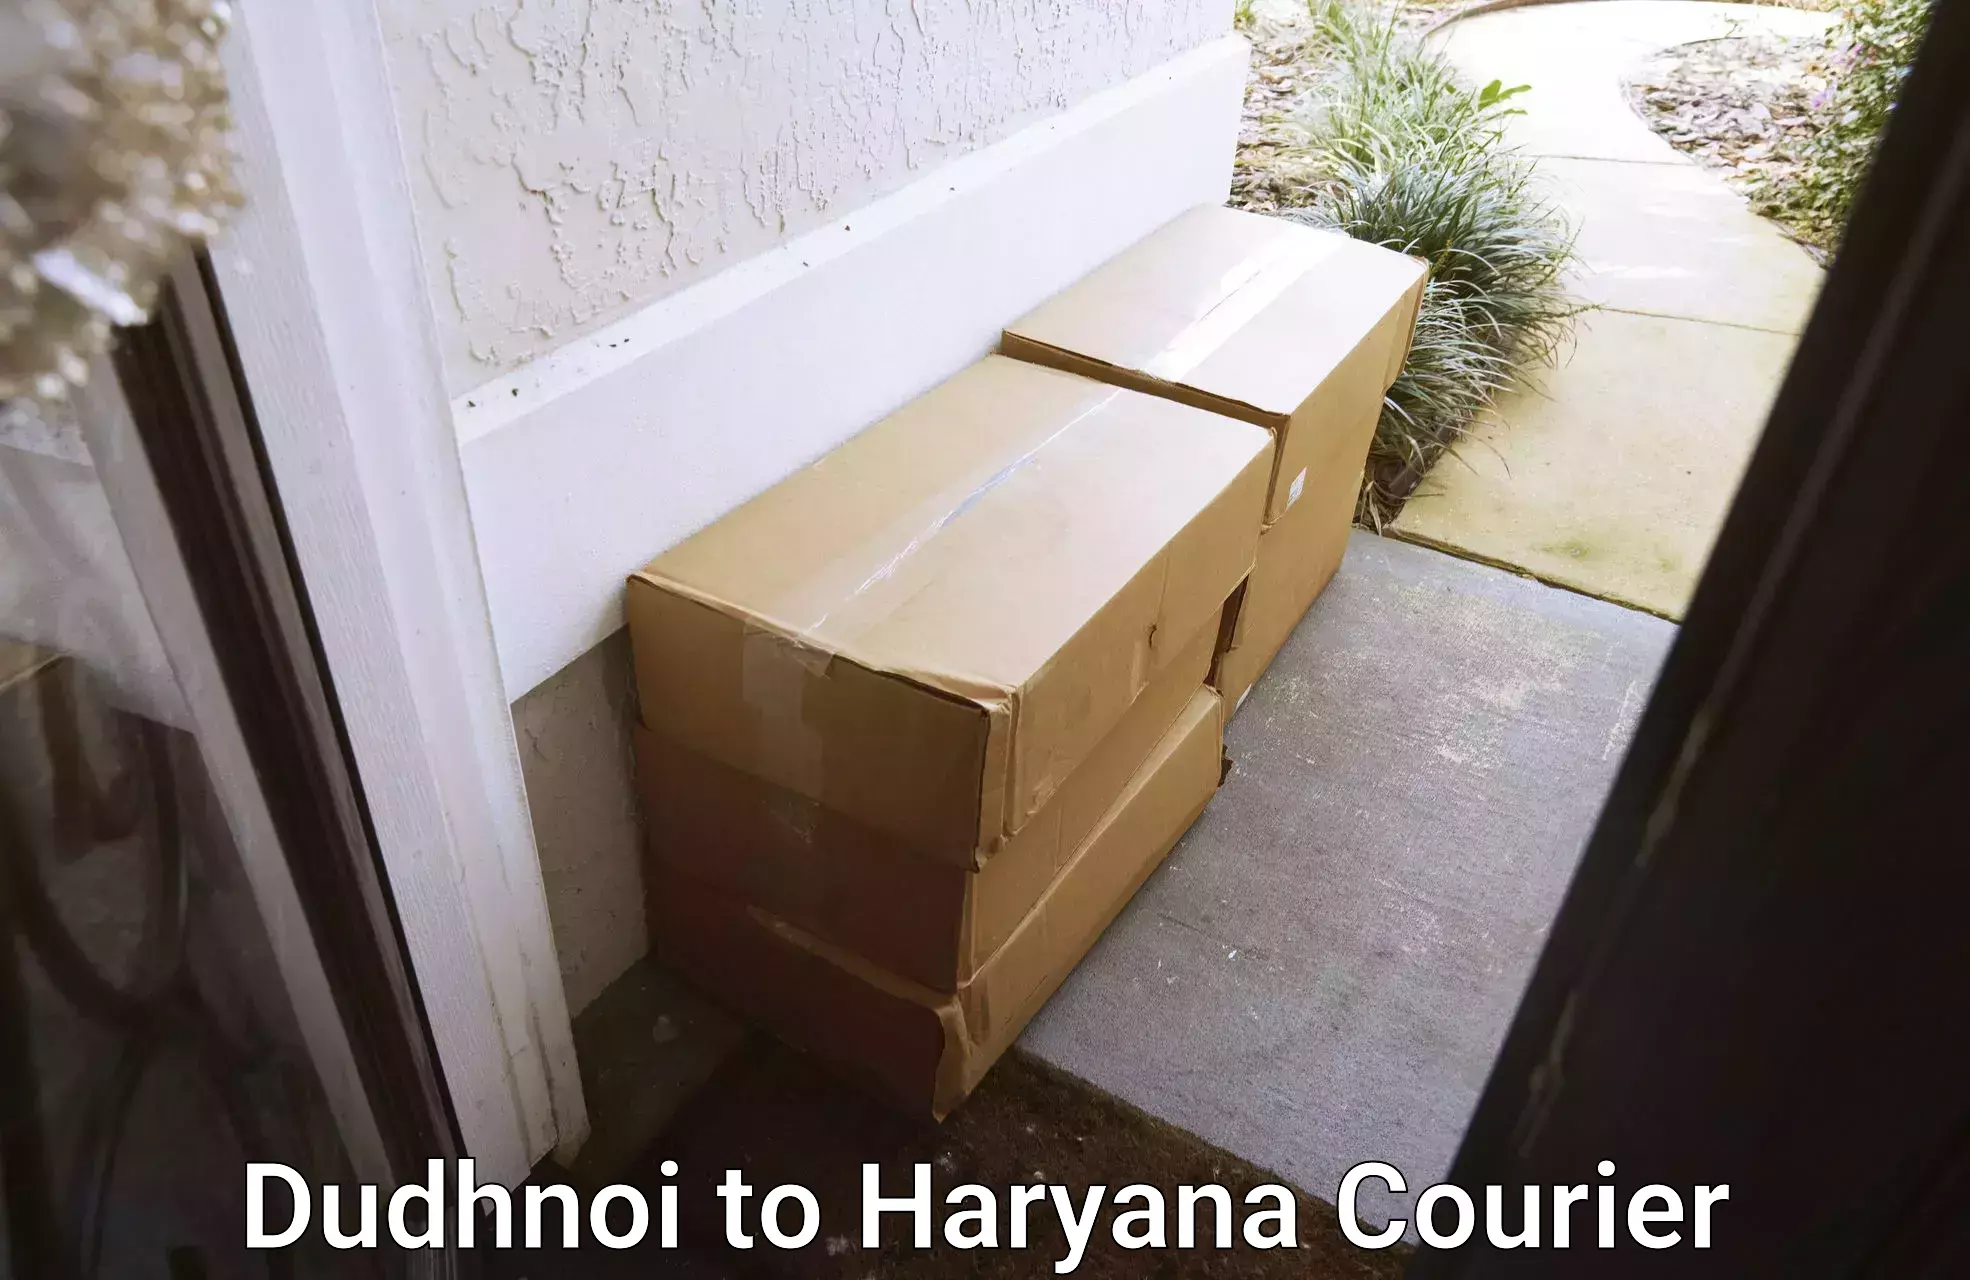 High-priority parcel service Dudhnoi to Panchkula